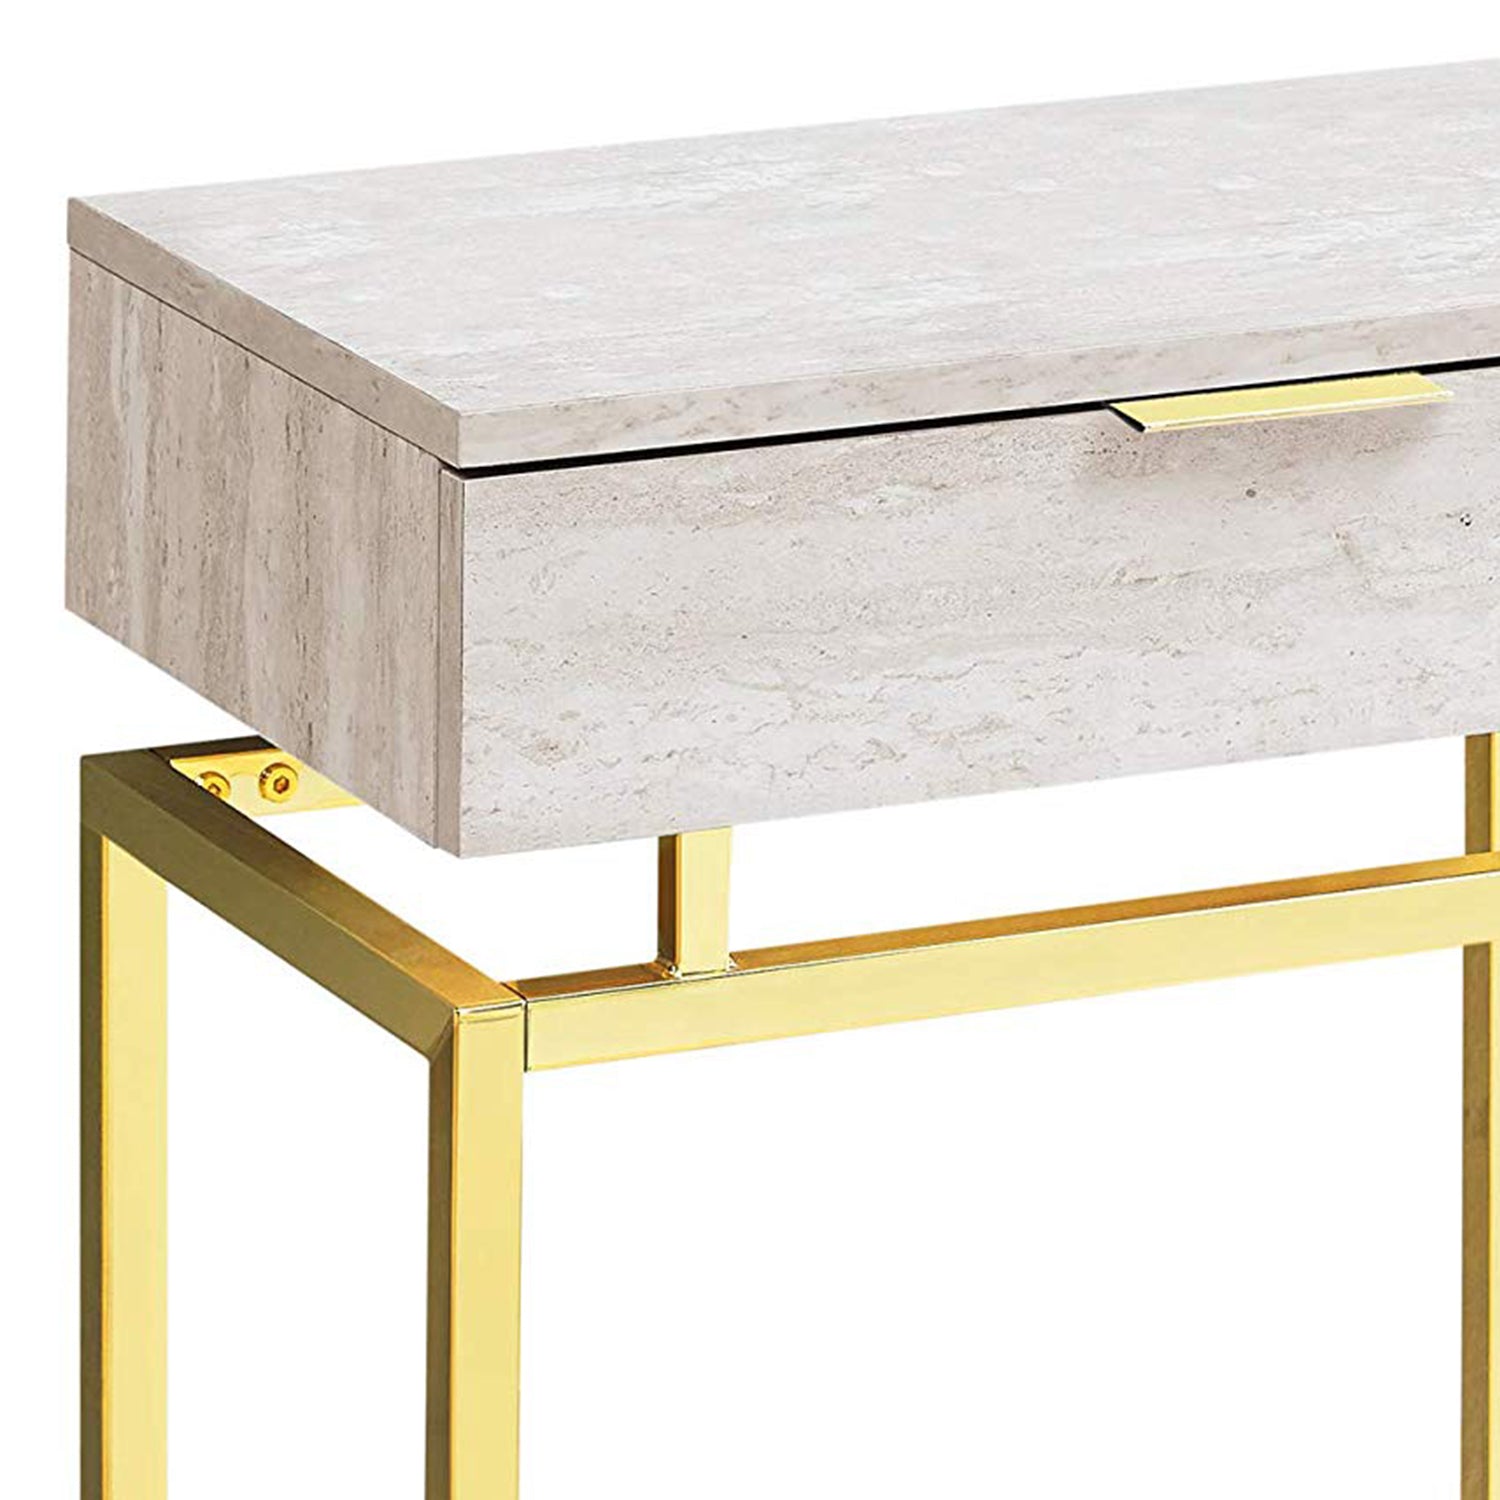 23" Gold And Beige End Table With Drawer